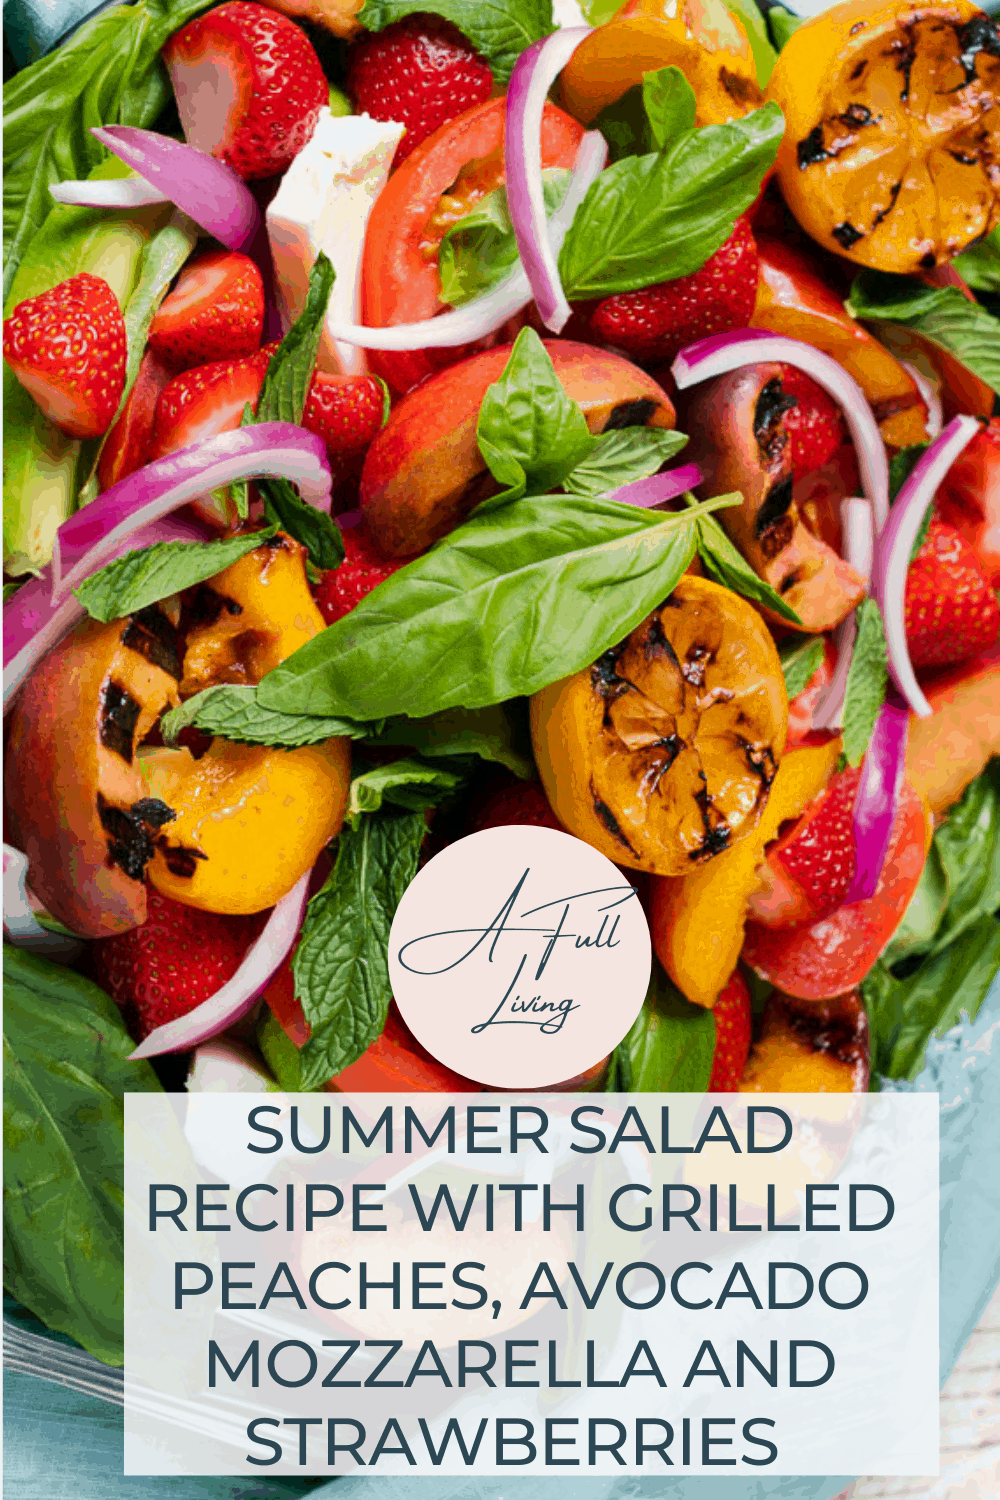 graphic with text of Summer Salad Recipe with Grilled Peaches, Avocado Mozzarella and Strawberries